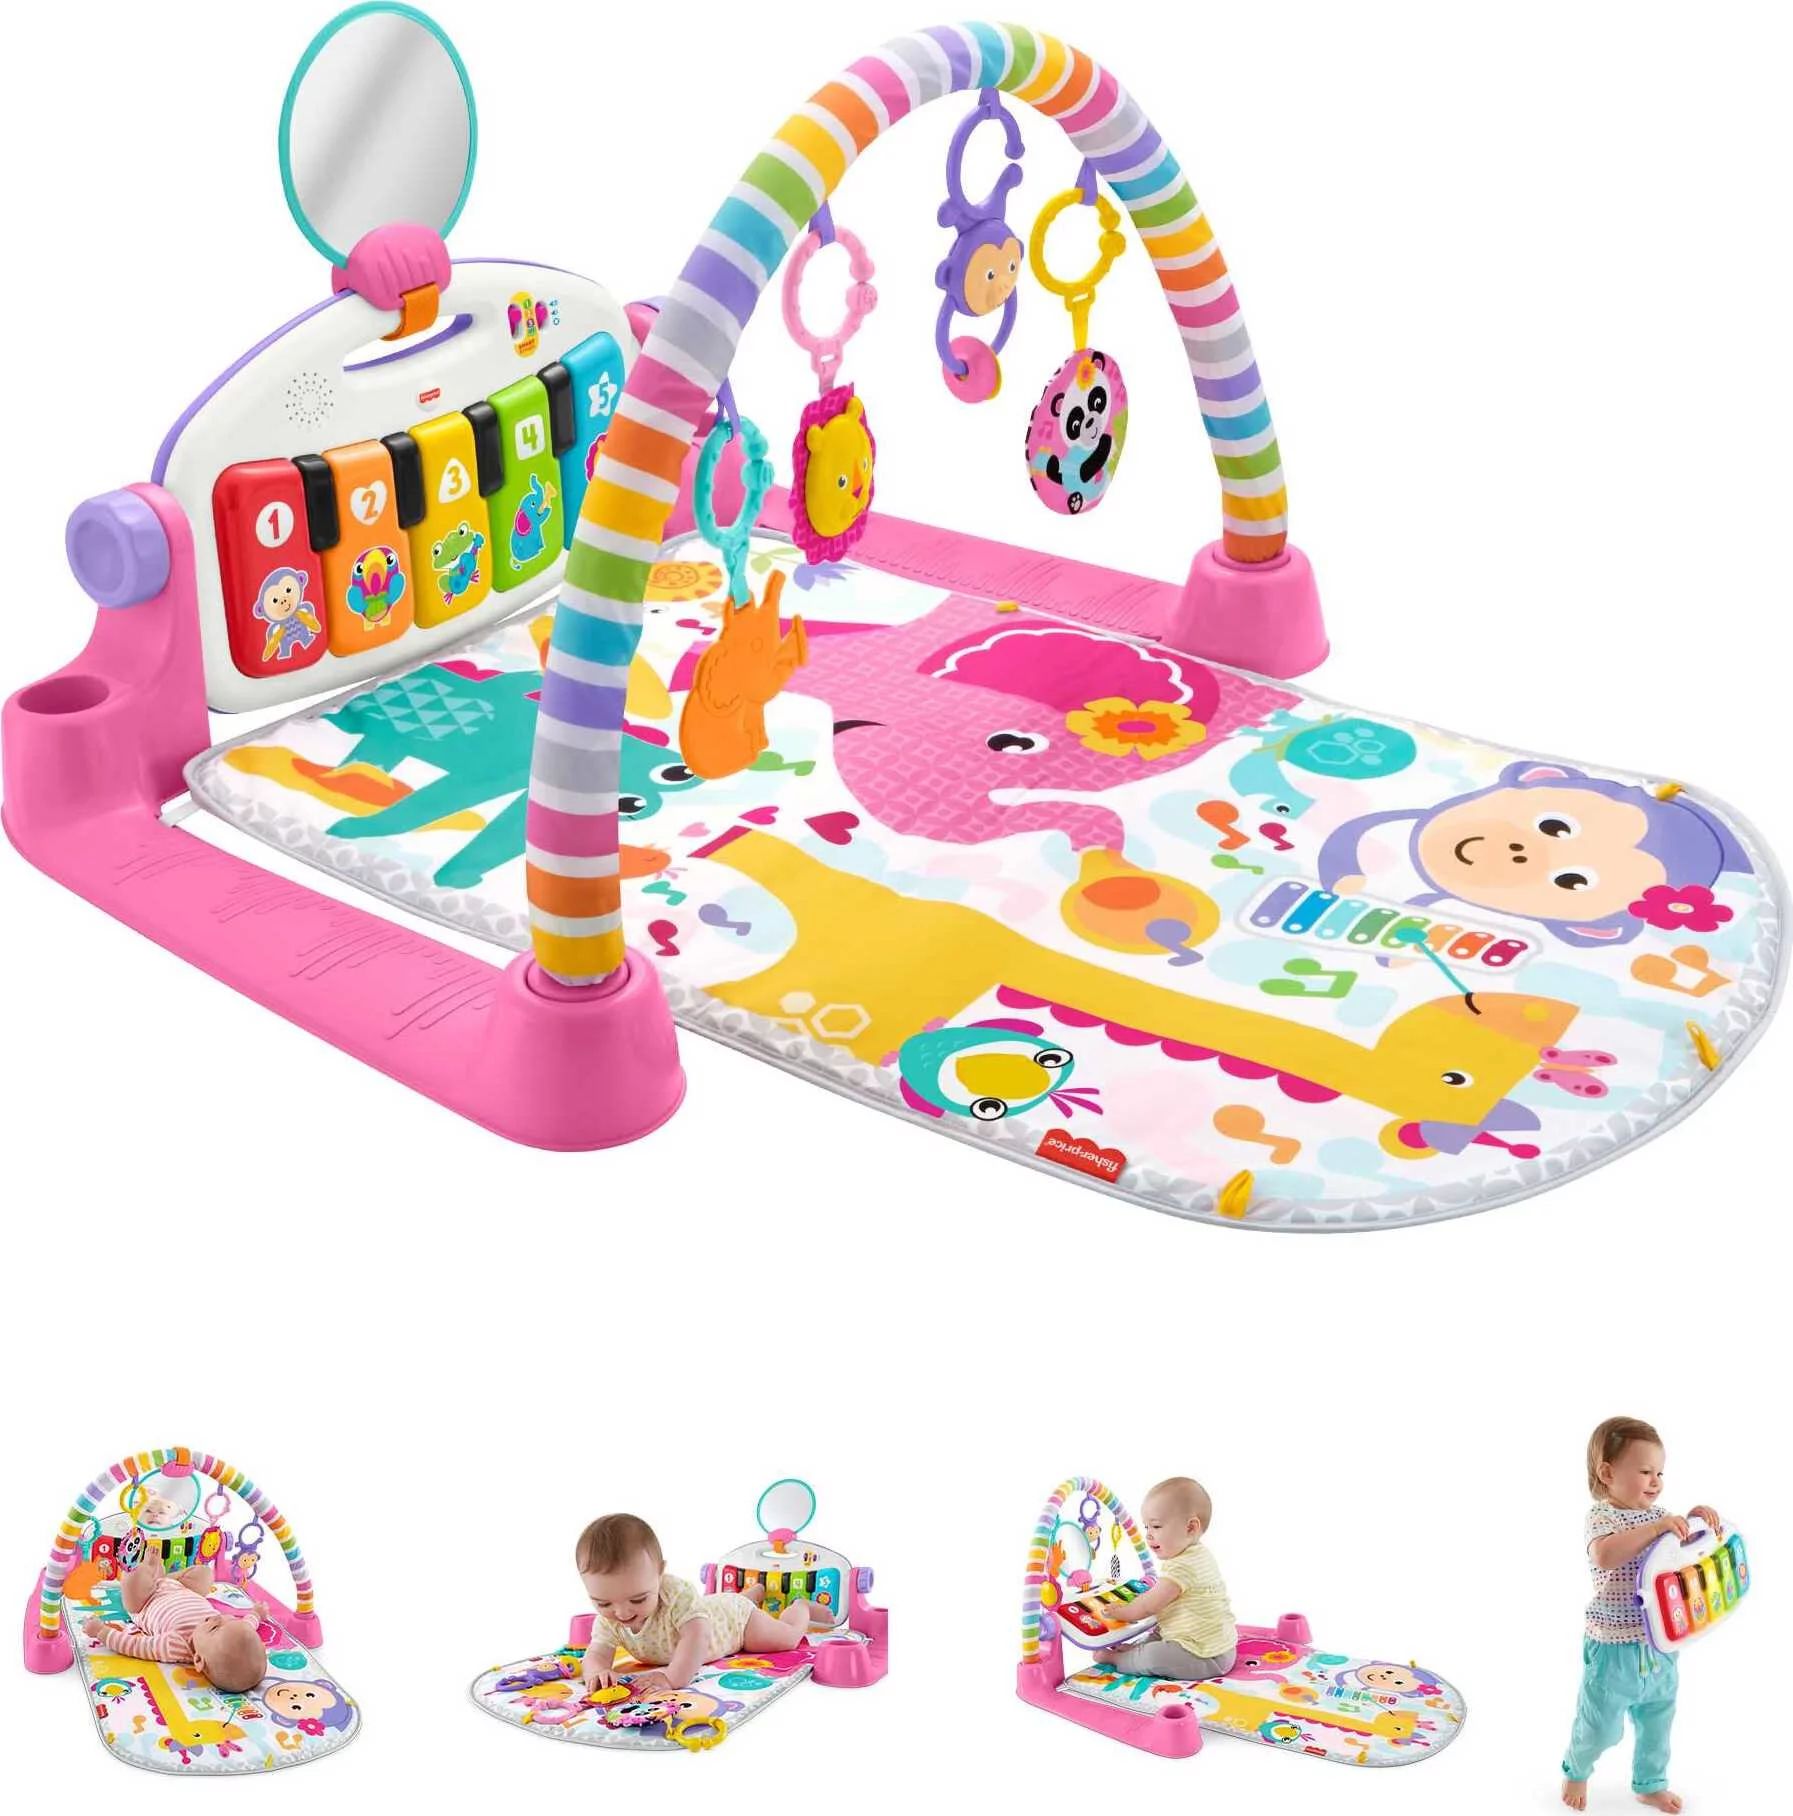 Fisher-Price Deluxe Kick & Play Piano Gym Baby Playmat with Electronic Learning Toy, Pink | Walmart (US)